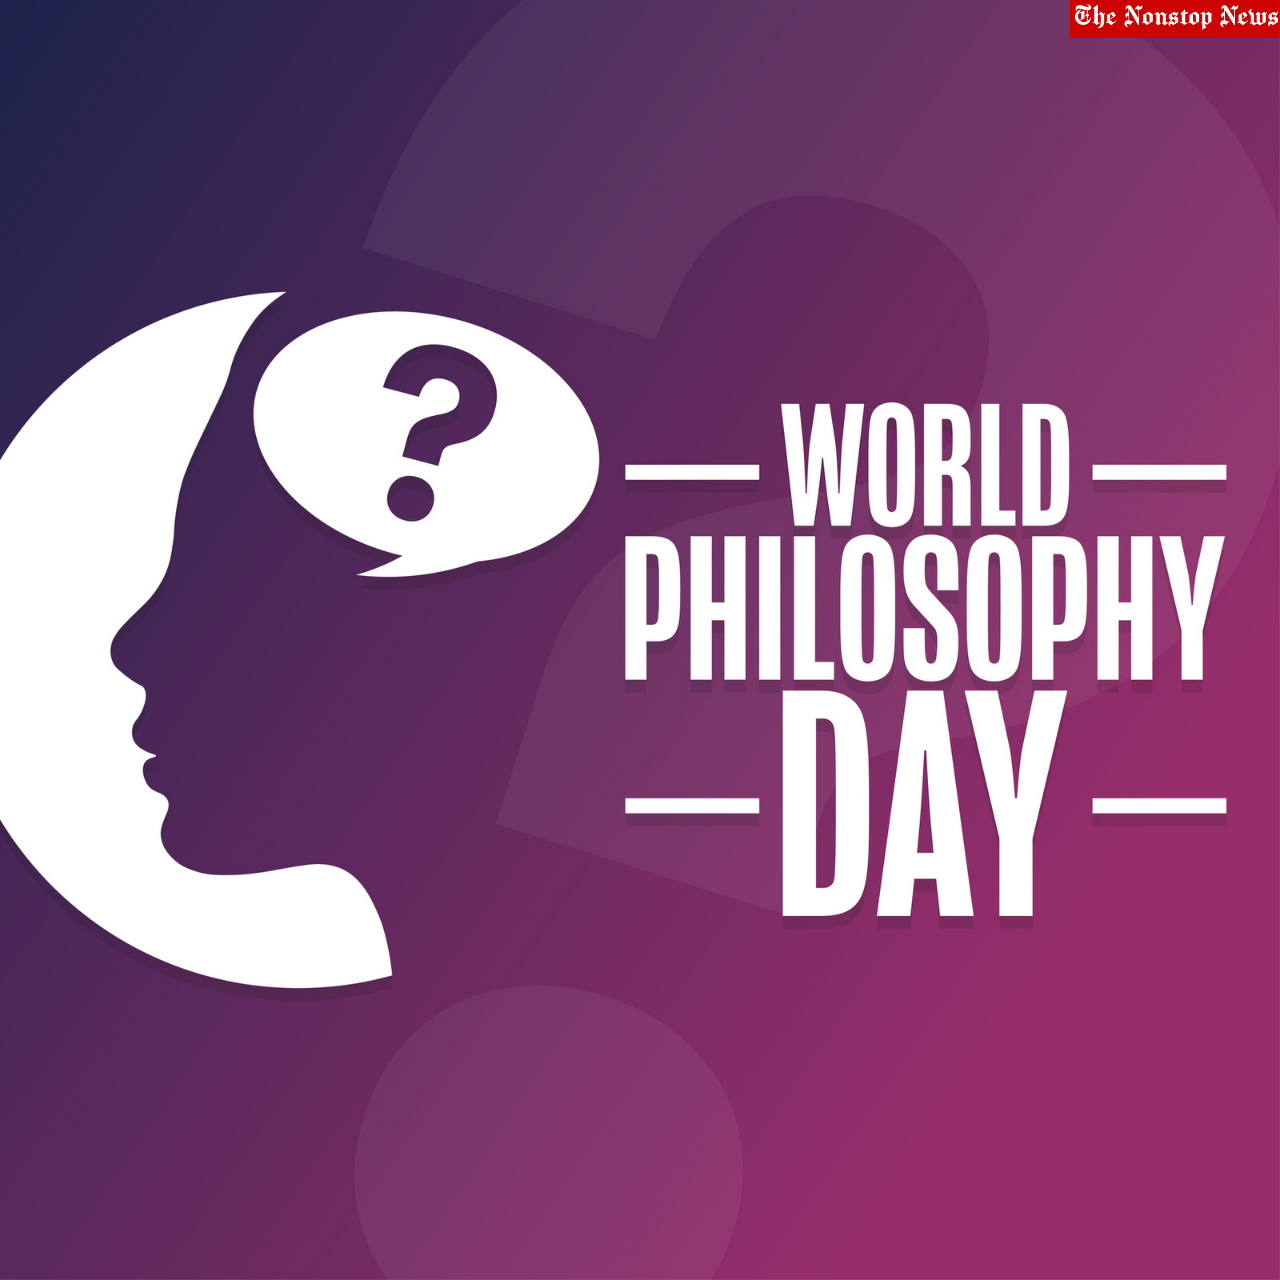 World Philosophy Day 2021 Quotes, HD Images, Messages, and Poster to Share